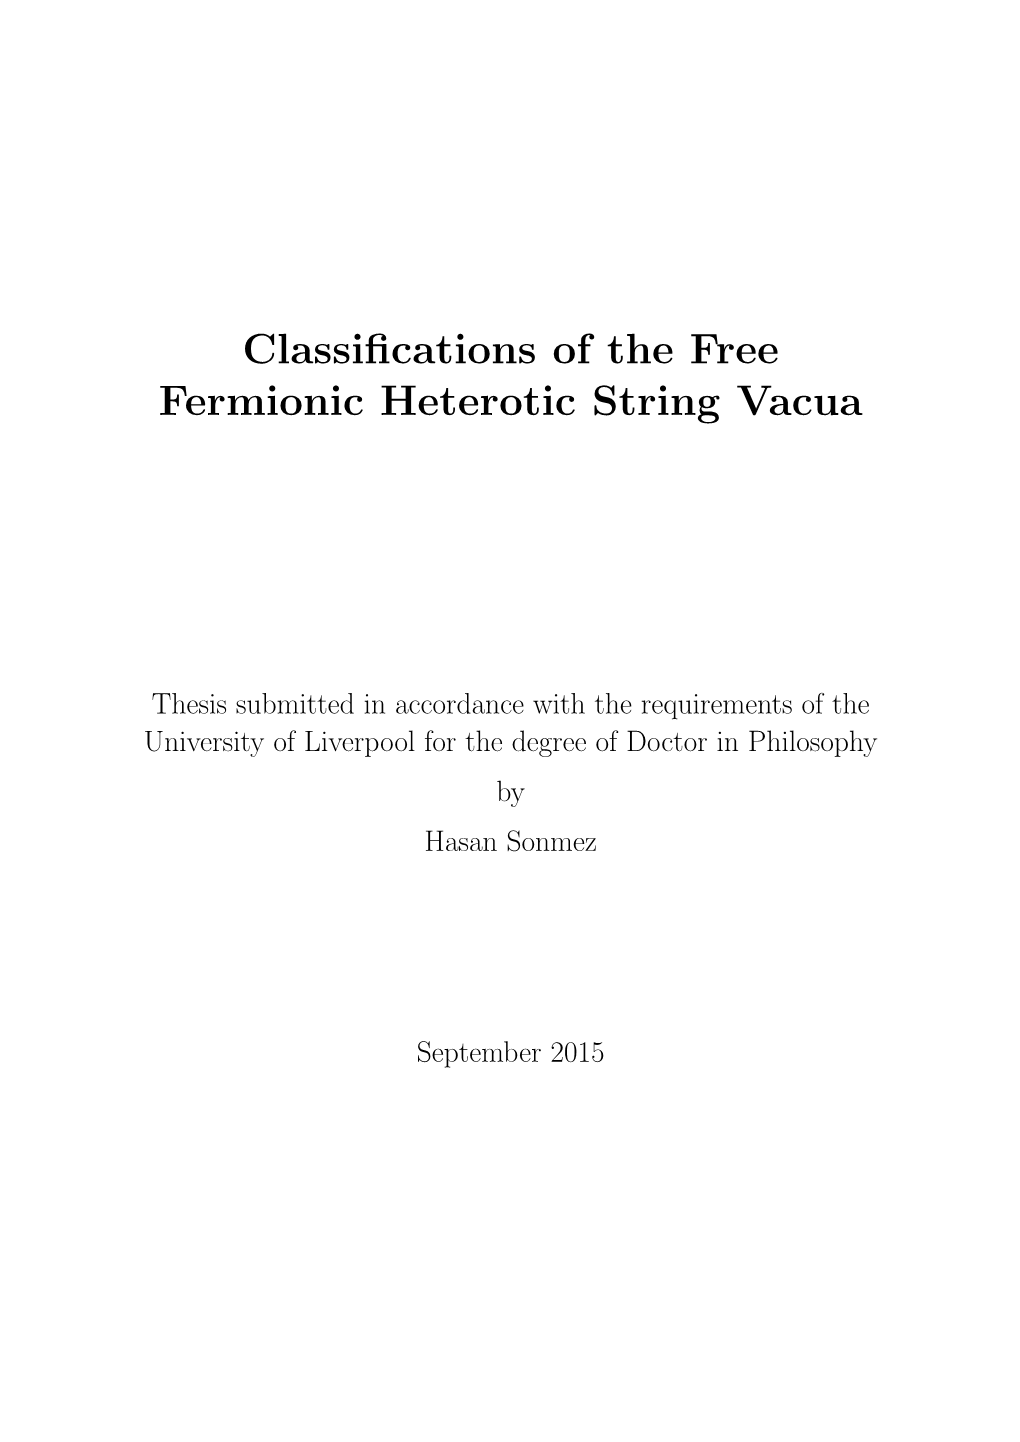 Classifications of the Free Fermionic Heterotic String Vacua